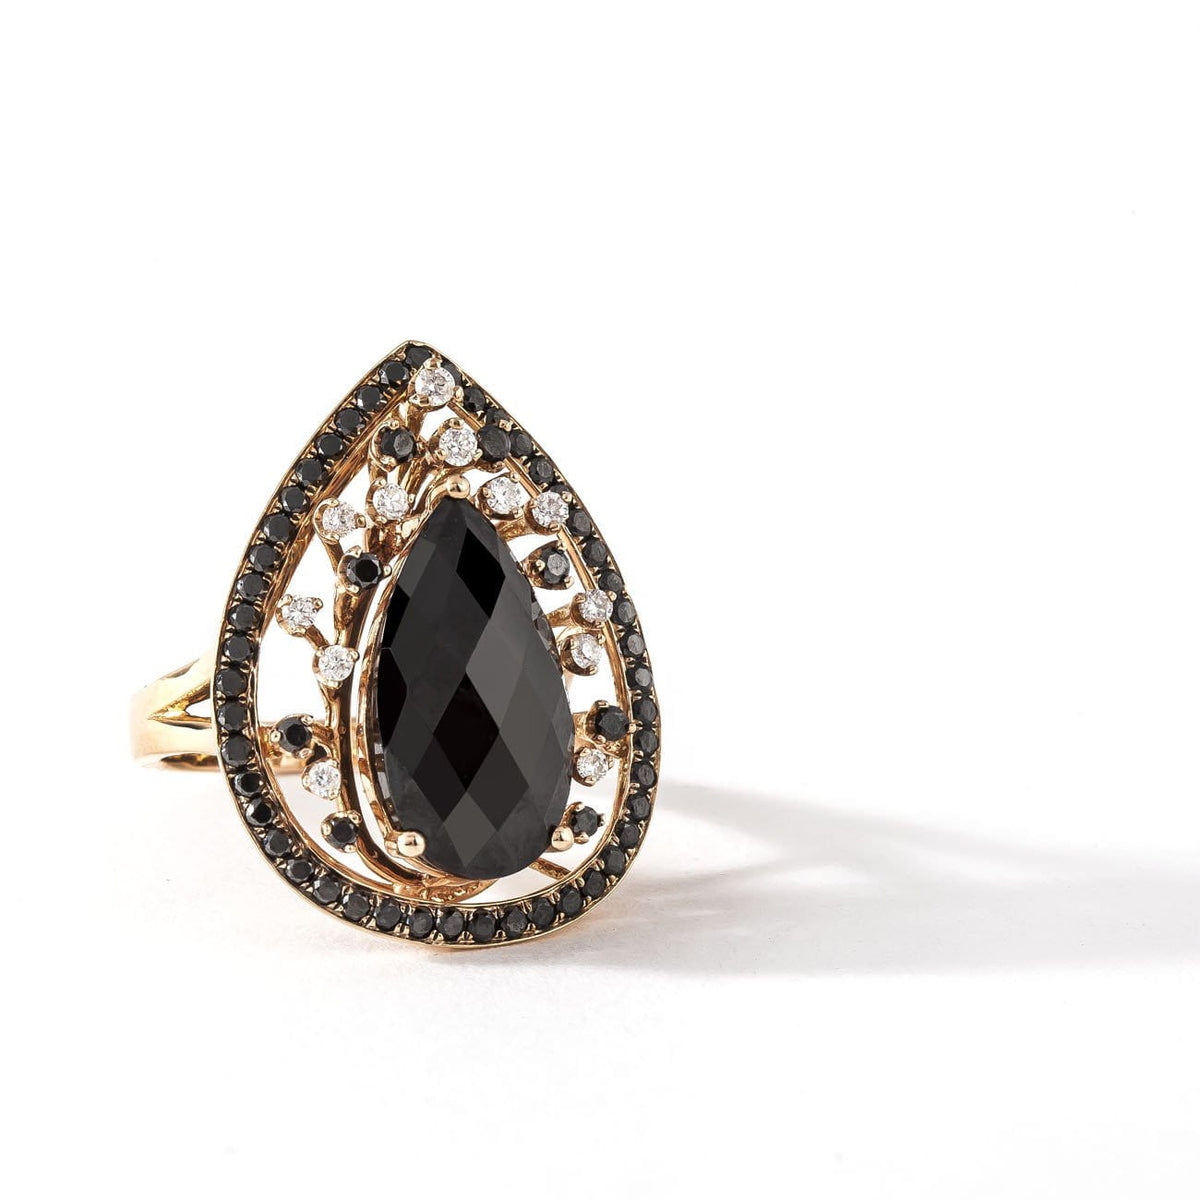 BLACK DIAMOND RING - PEAR MYSTERY - Chris Aire Fine Jewelry & Timepieces